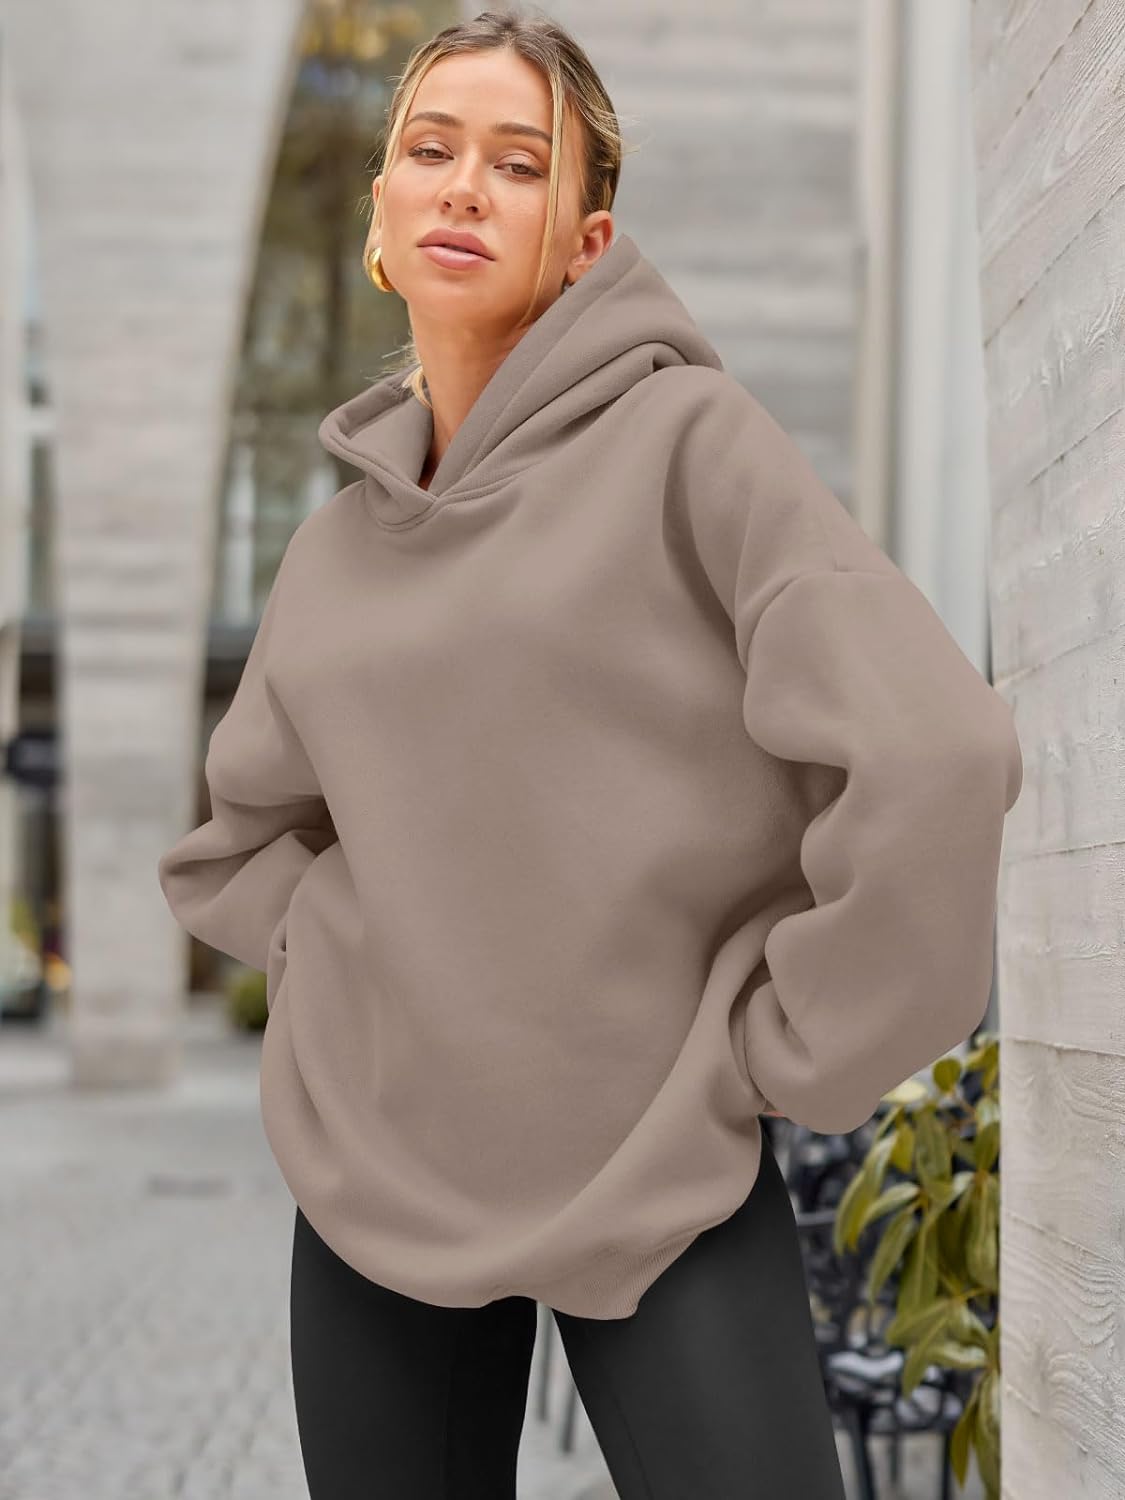 EFAN Womens Oversized Hoodies Sweatshirts Fleece Hooded Pullover Tops Sweaters Casual Comfy Fall Fashion Outfits Clothes 2023